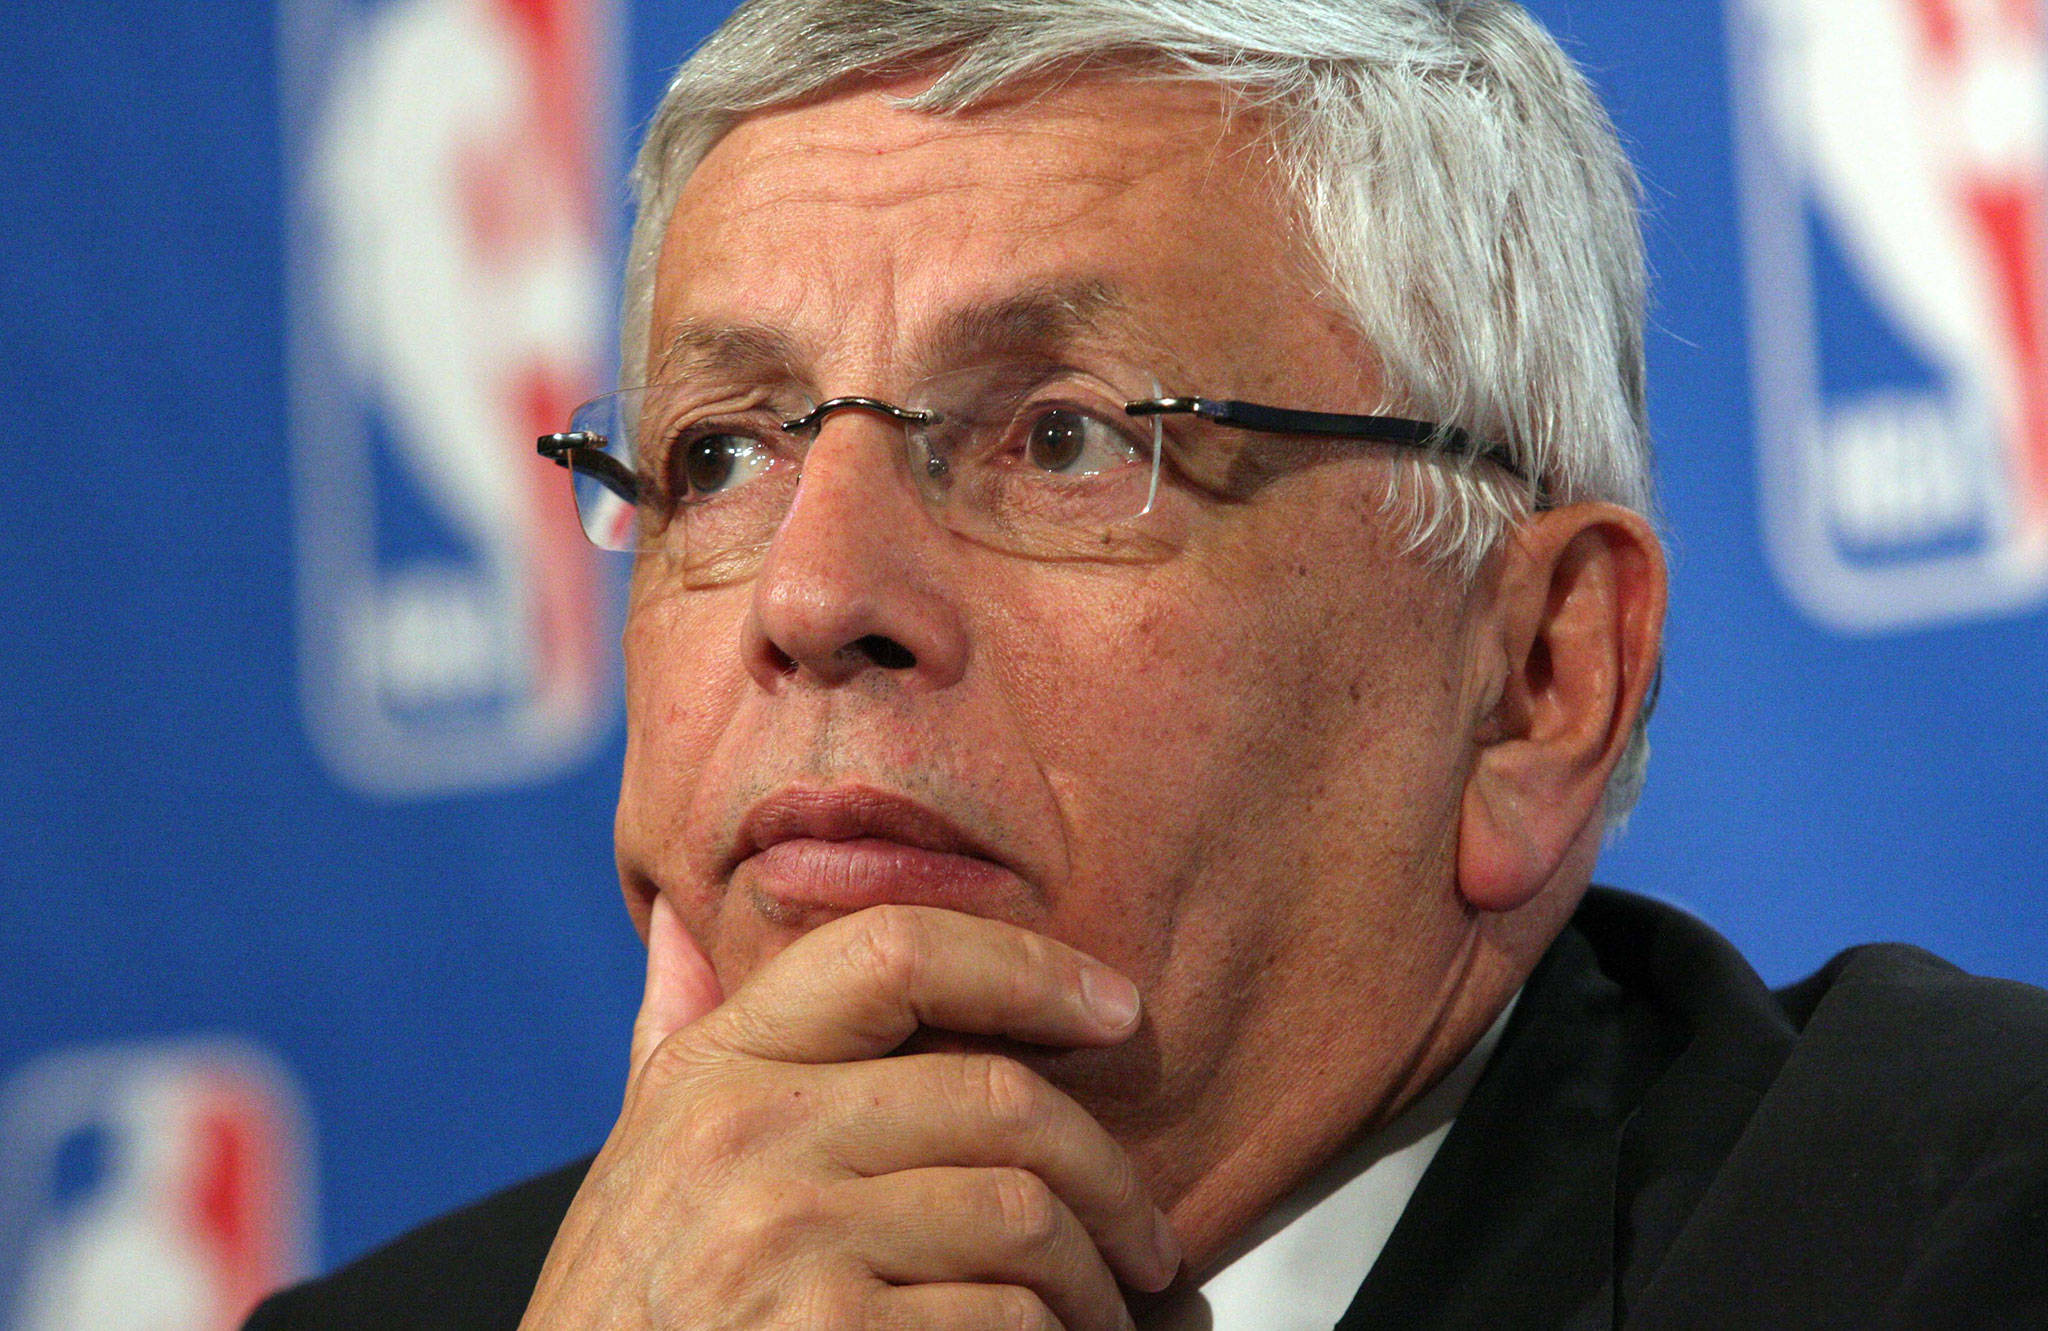 NBA commissioner David Stern pauses as he takes questions during a news conference after NBA owners approved the SuperSonics’ move to Oklahoma City on April 18, 2008, in New York. (AP Photo/Tina Fineberg)